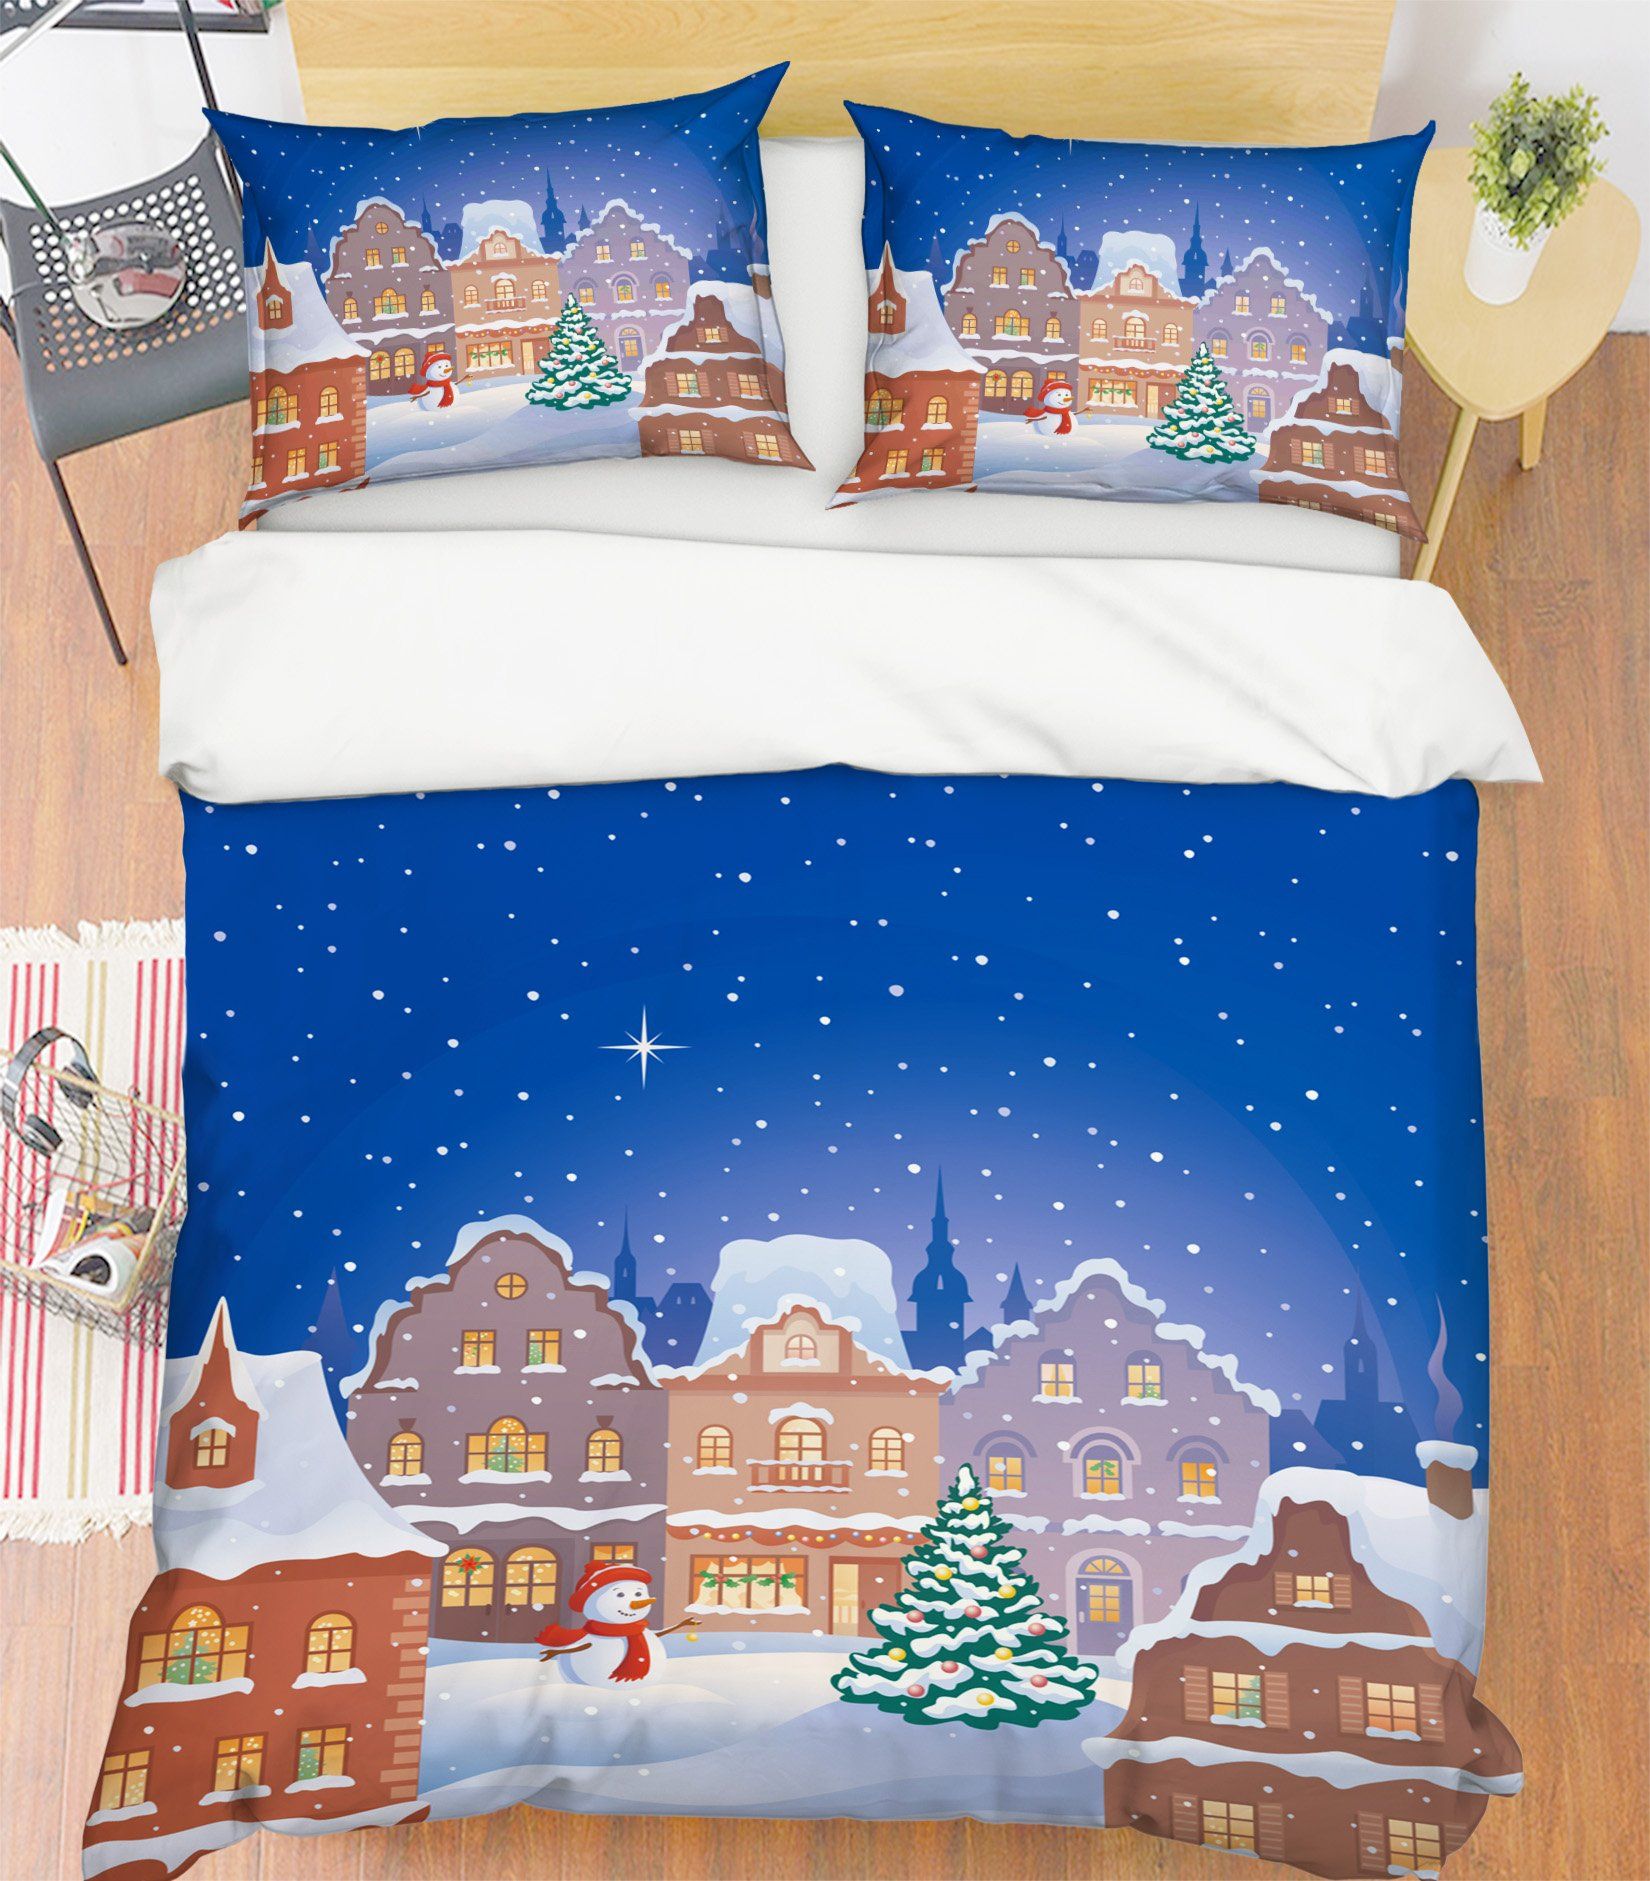 3D Christmas Lovely Town 8 Bed Pillowcases Quilt Quiet Covers AJ Creativity Home 